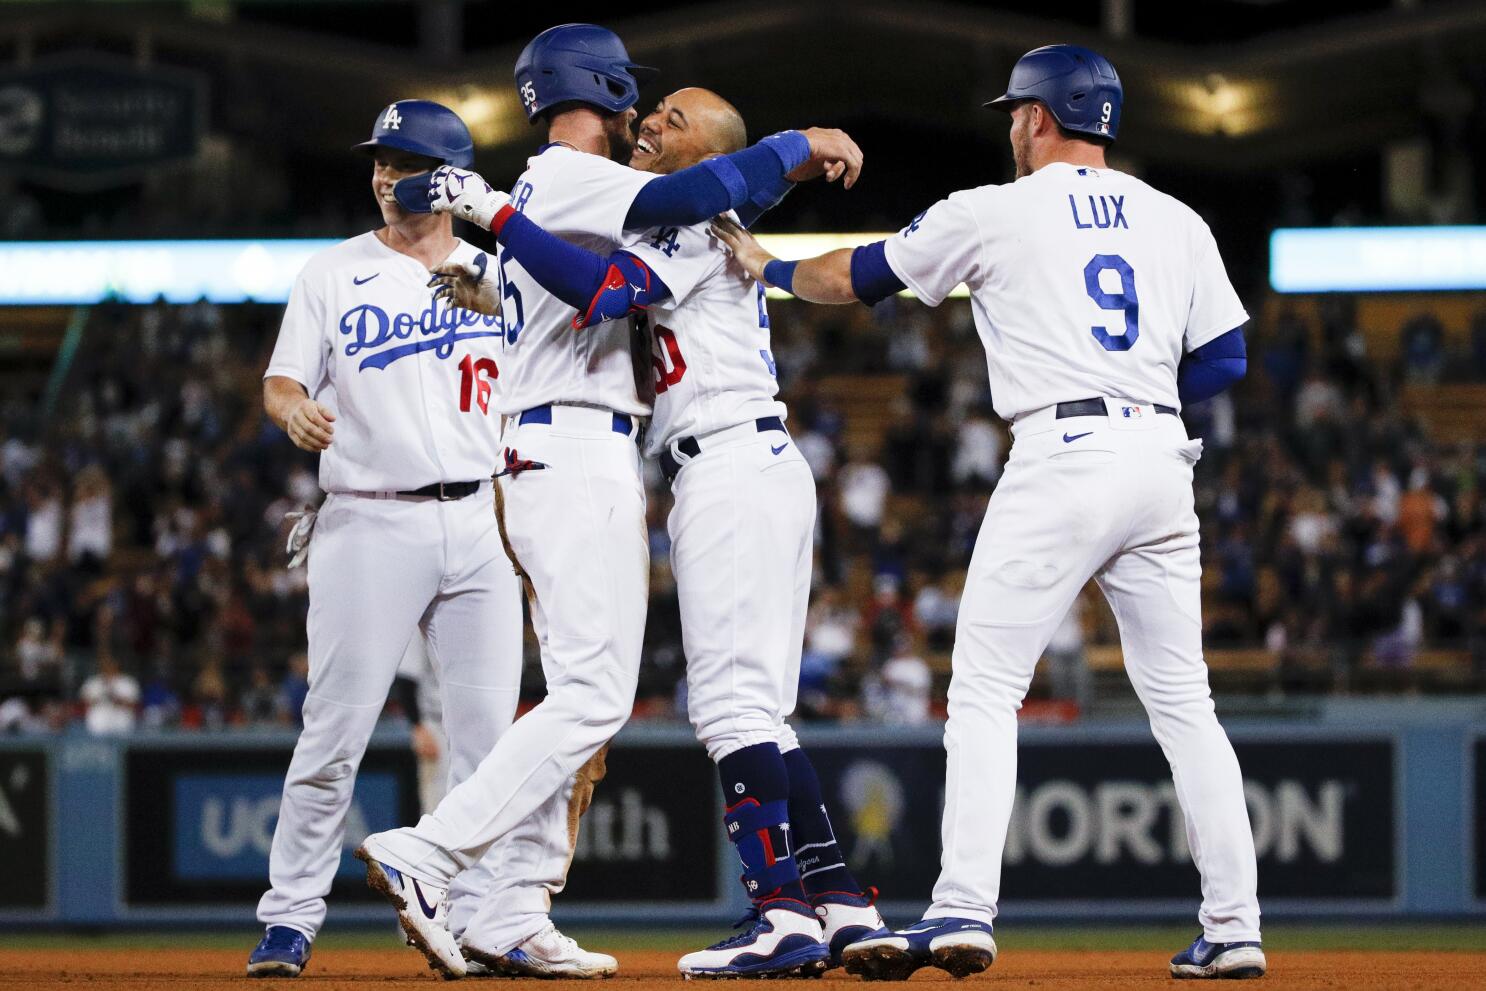 The Sports Report: Dodgers rally for walk-off win over Rockies, extend lead  in NL West - Los Angeles Times